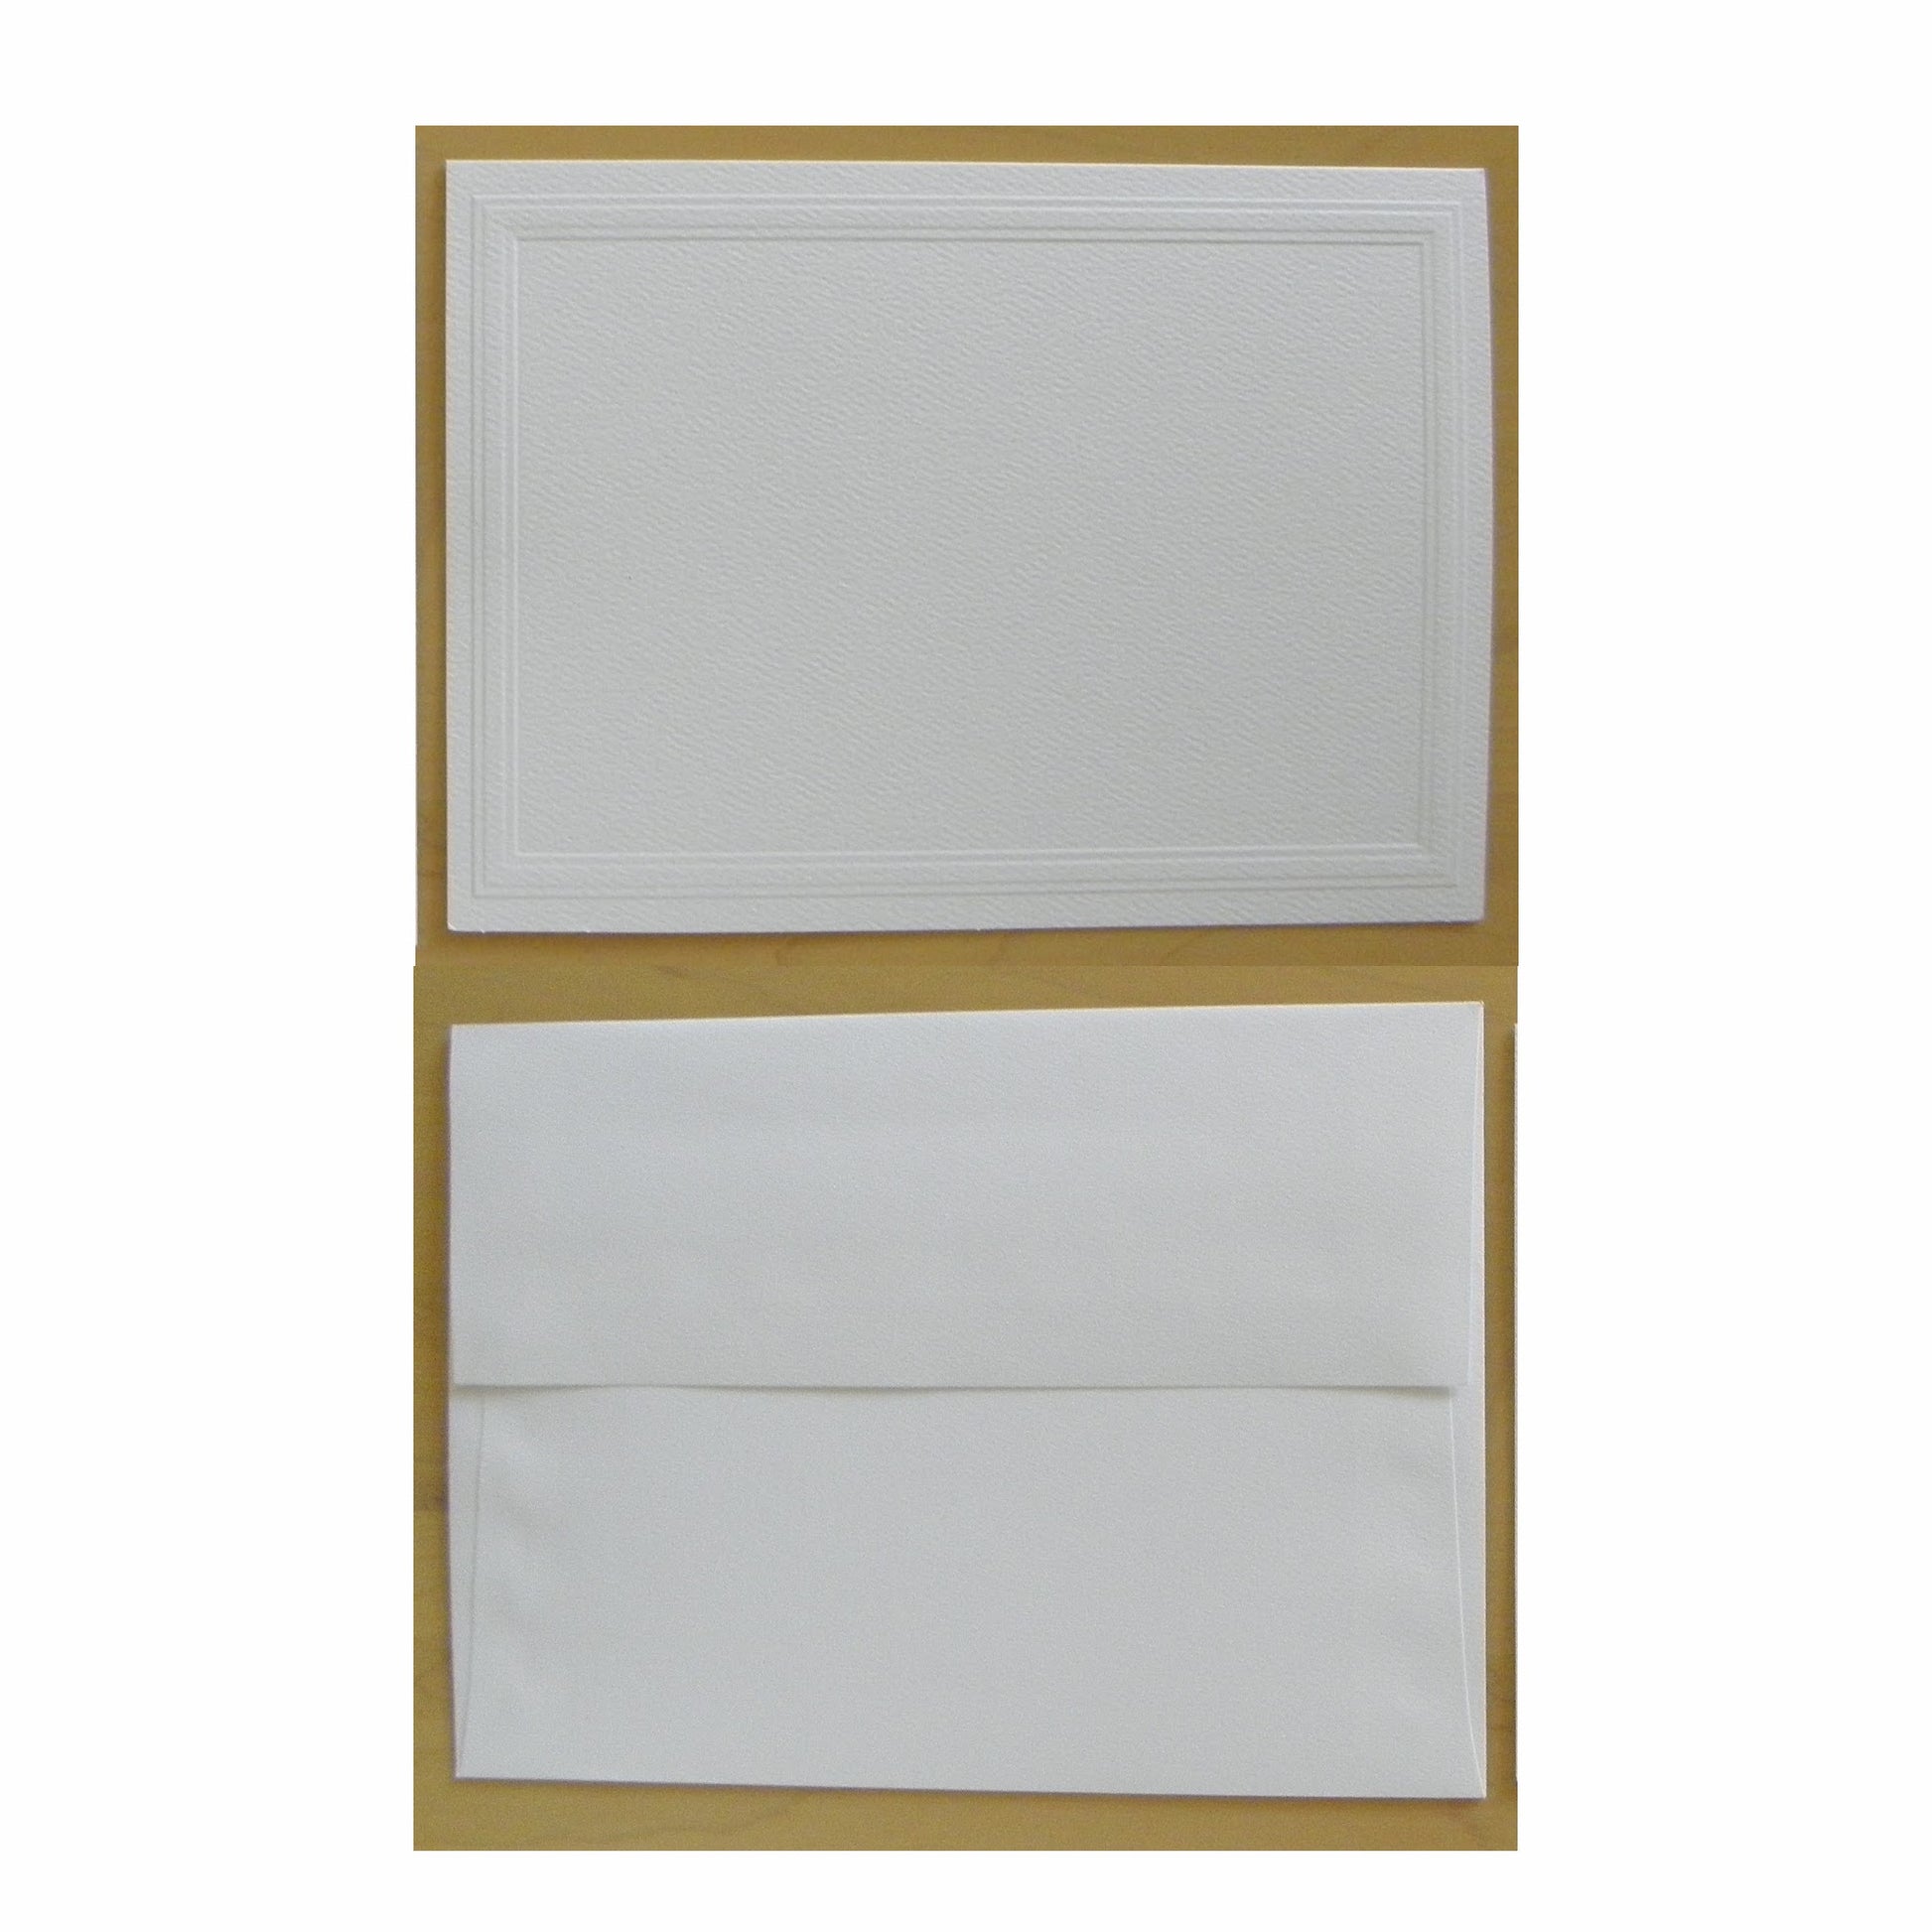 Photograph of the deluxe embossed Classic card stock and Envelope